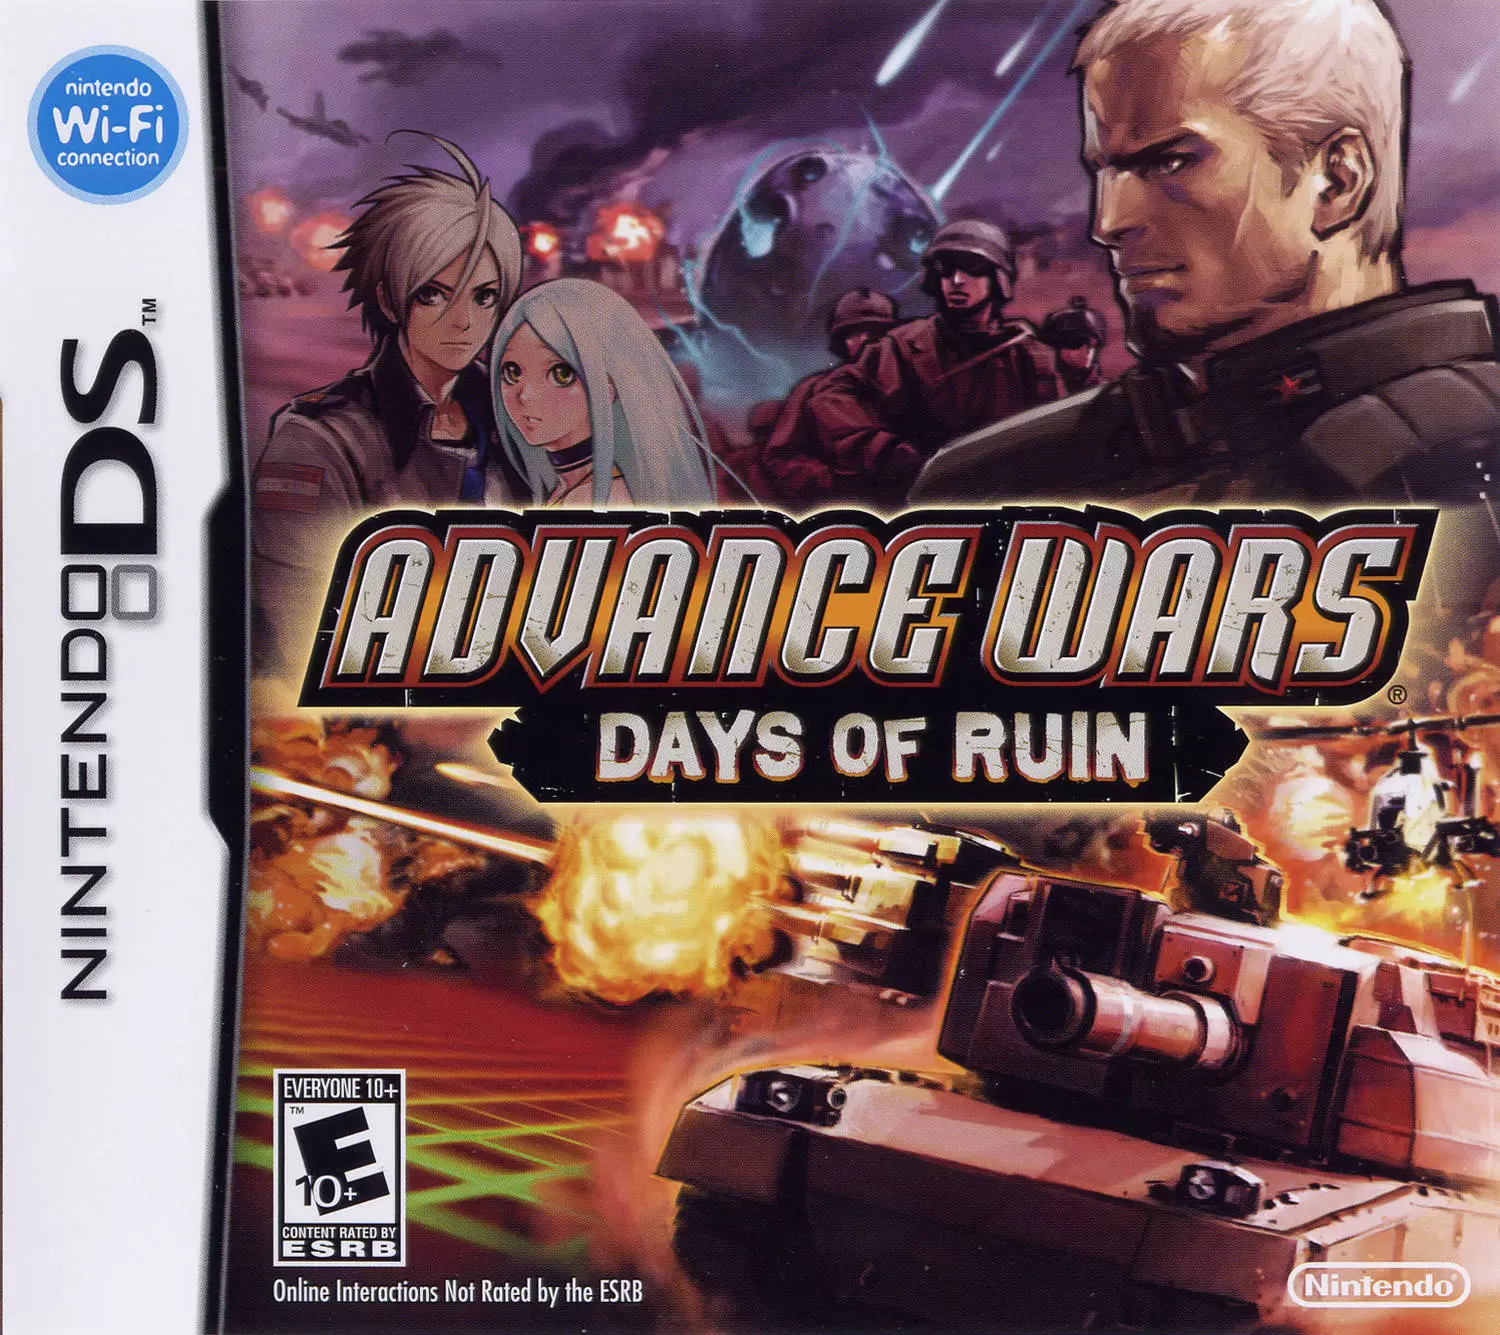 Nintendo DS Games - Advance Wars: Days of Ruin